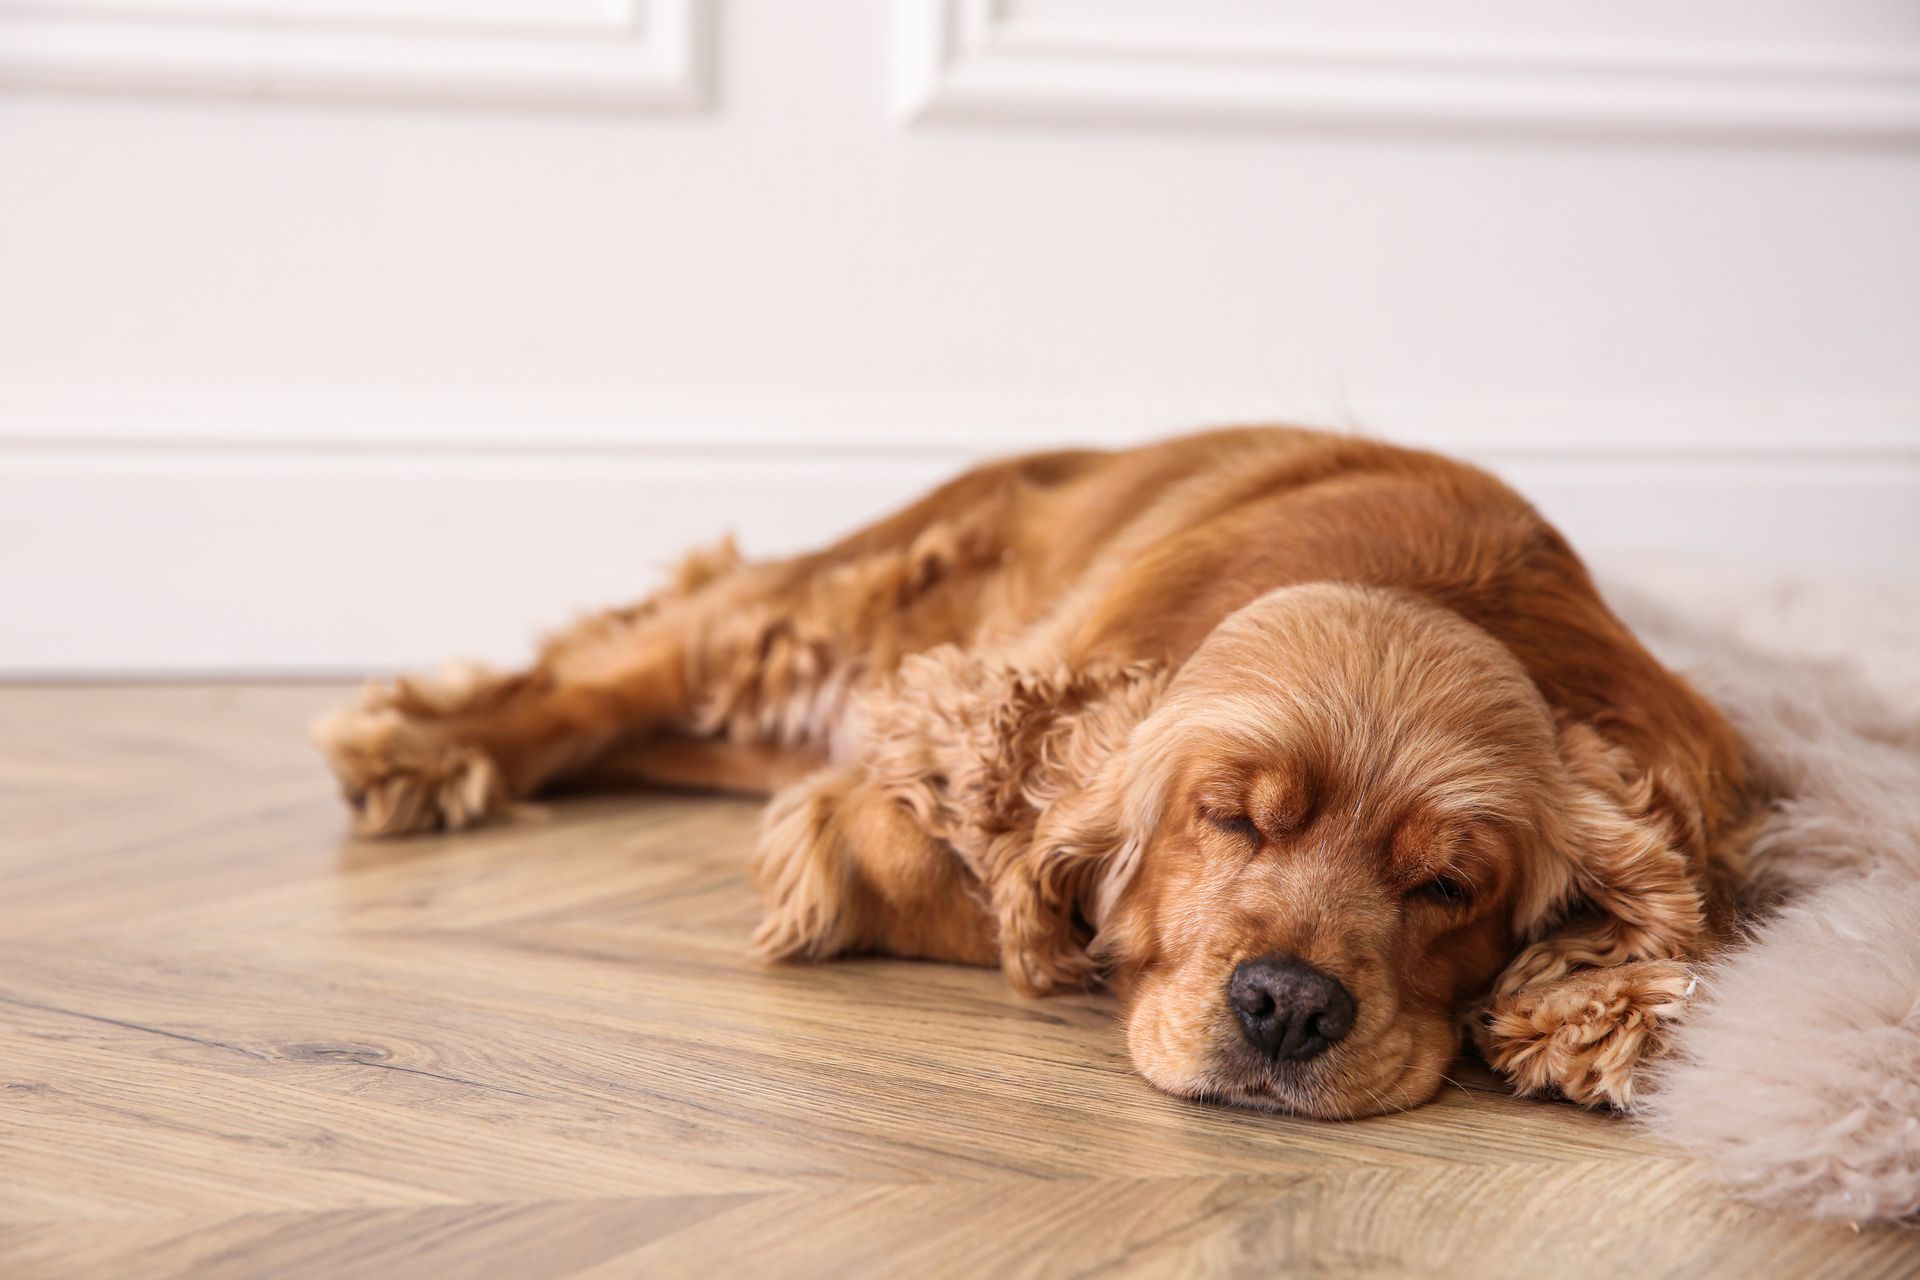 WHAT SCREED IS RIGHT FOR YOU AND YOUR UNDERFLOOR HEATING